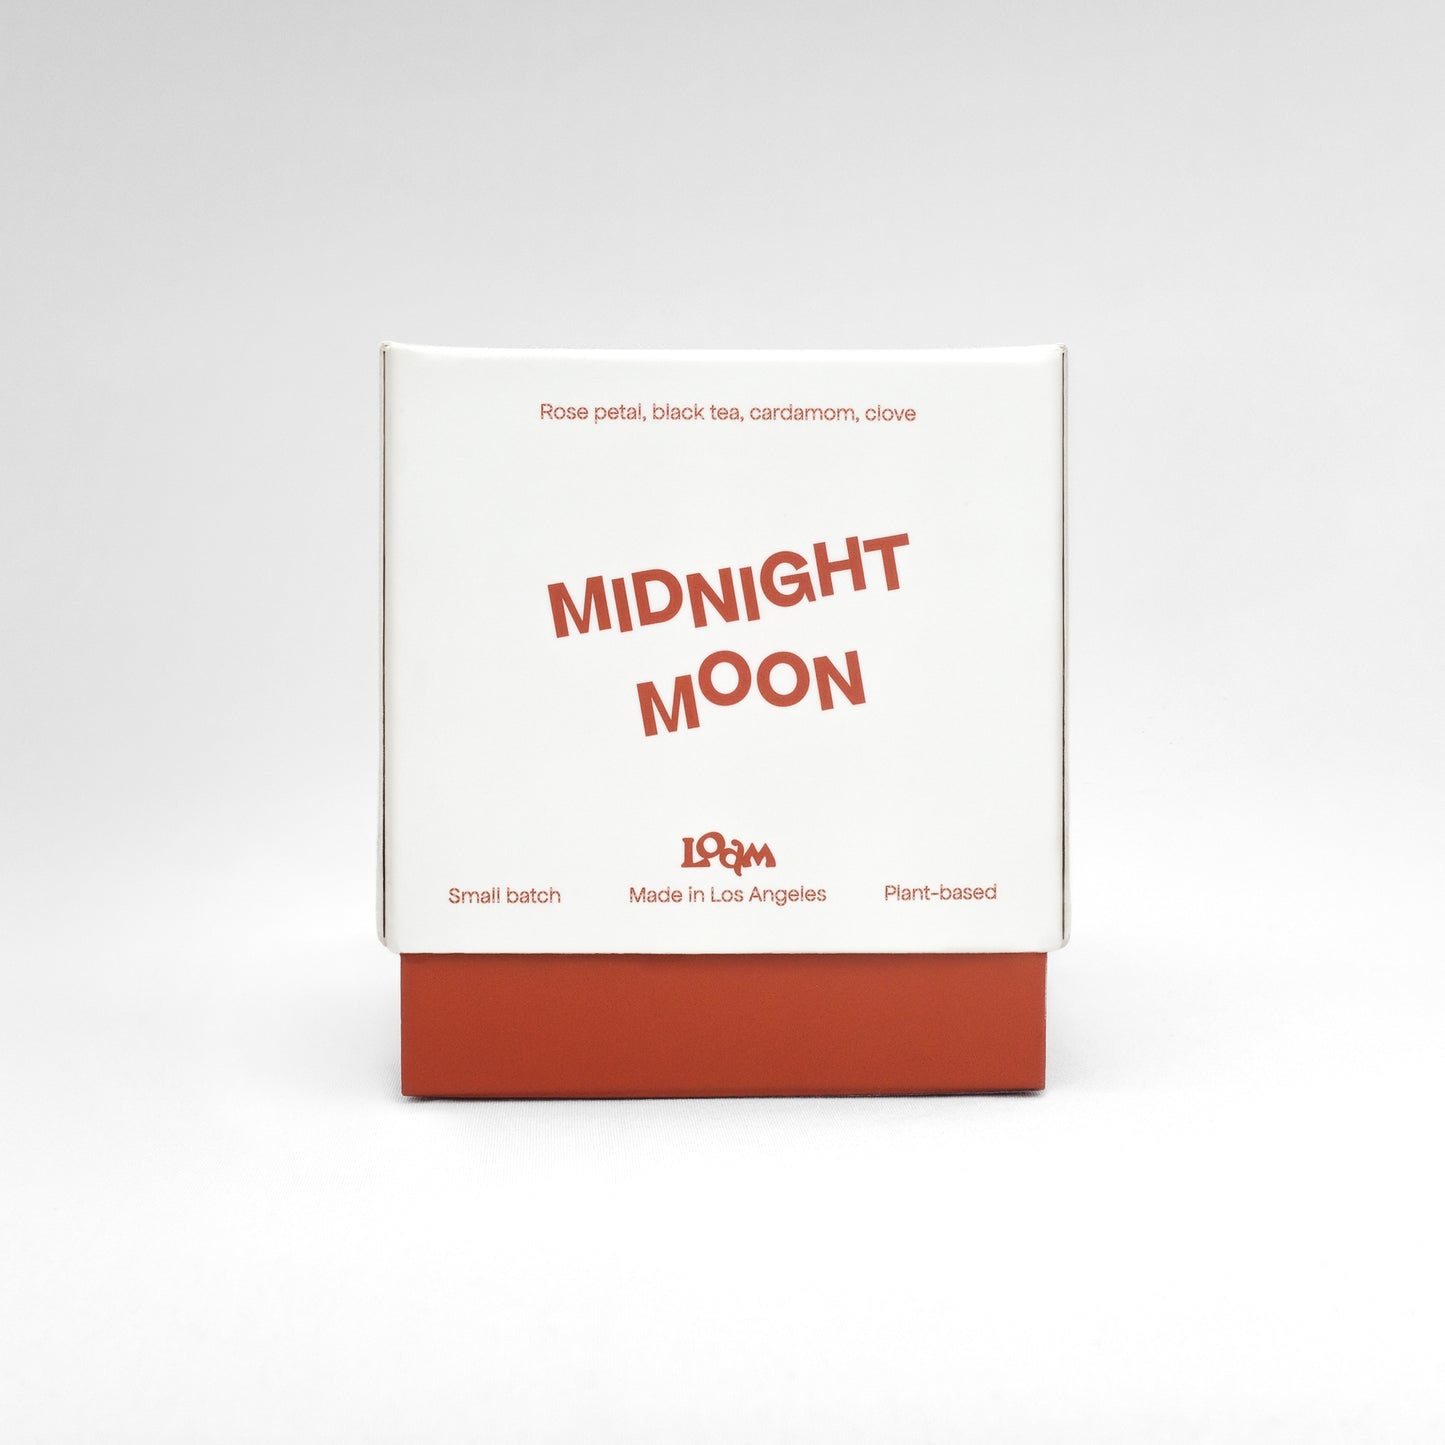 Aromatic cardamom and clove, musky patchouli and oud, and hints of rose make Midnight Moon a scent built for illuminating the long hours of the night. Every candle is crafted in small batches with coconut soy wax and 100% cotton wicks.